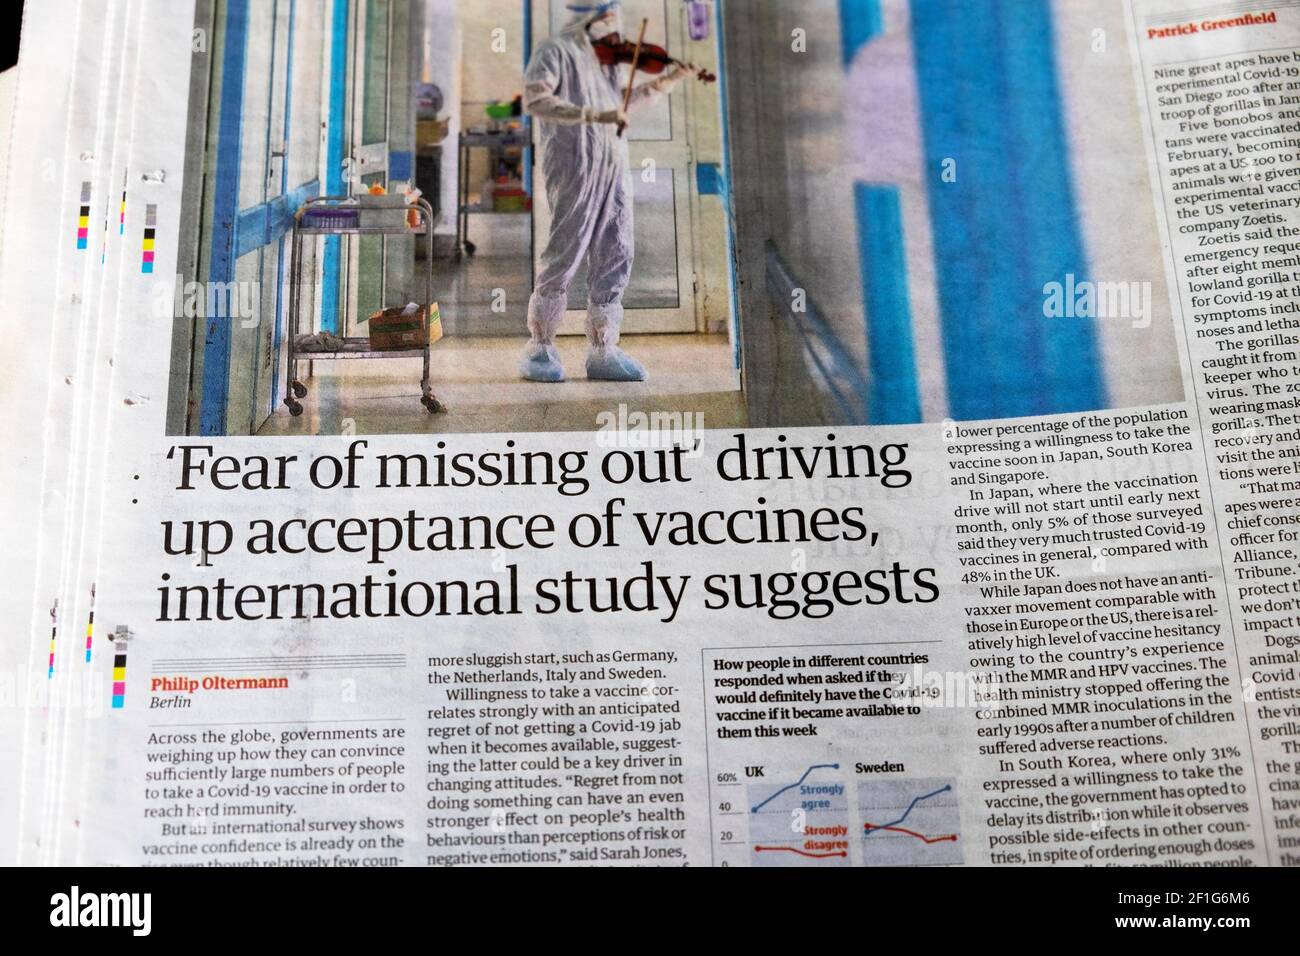 ' 'Fear of missing out' driving up acceptance of vaccines, international study suggests' article in Guardian newspaper headline 6 March 2021 London UK Stock Photo